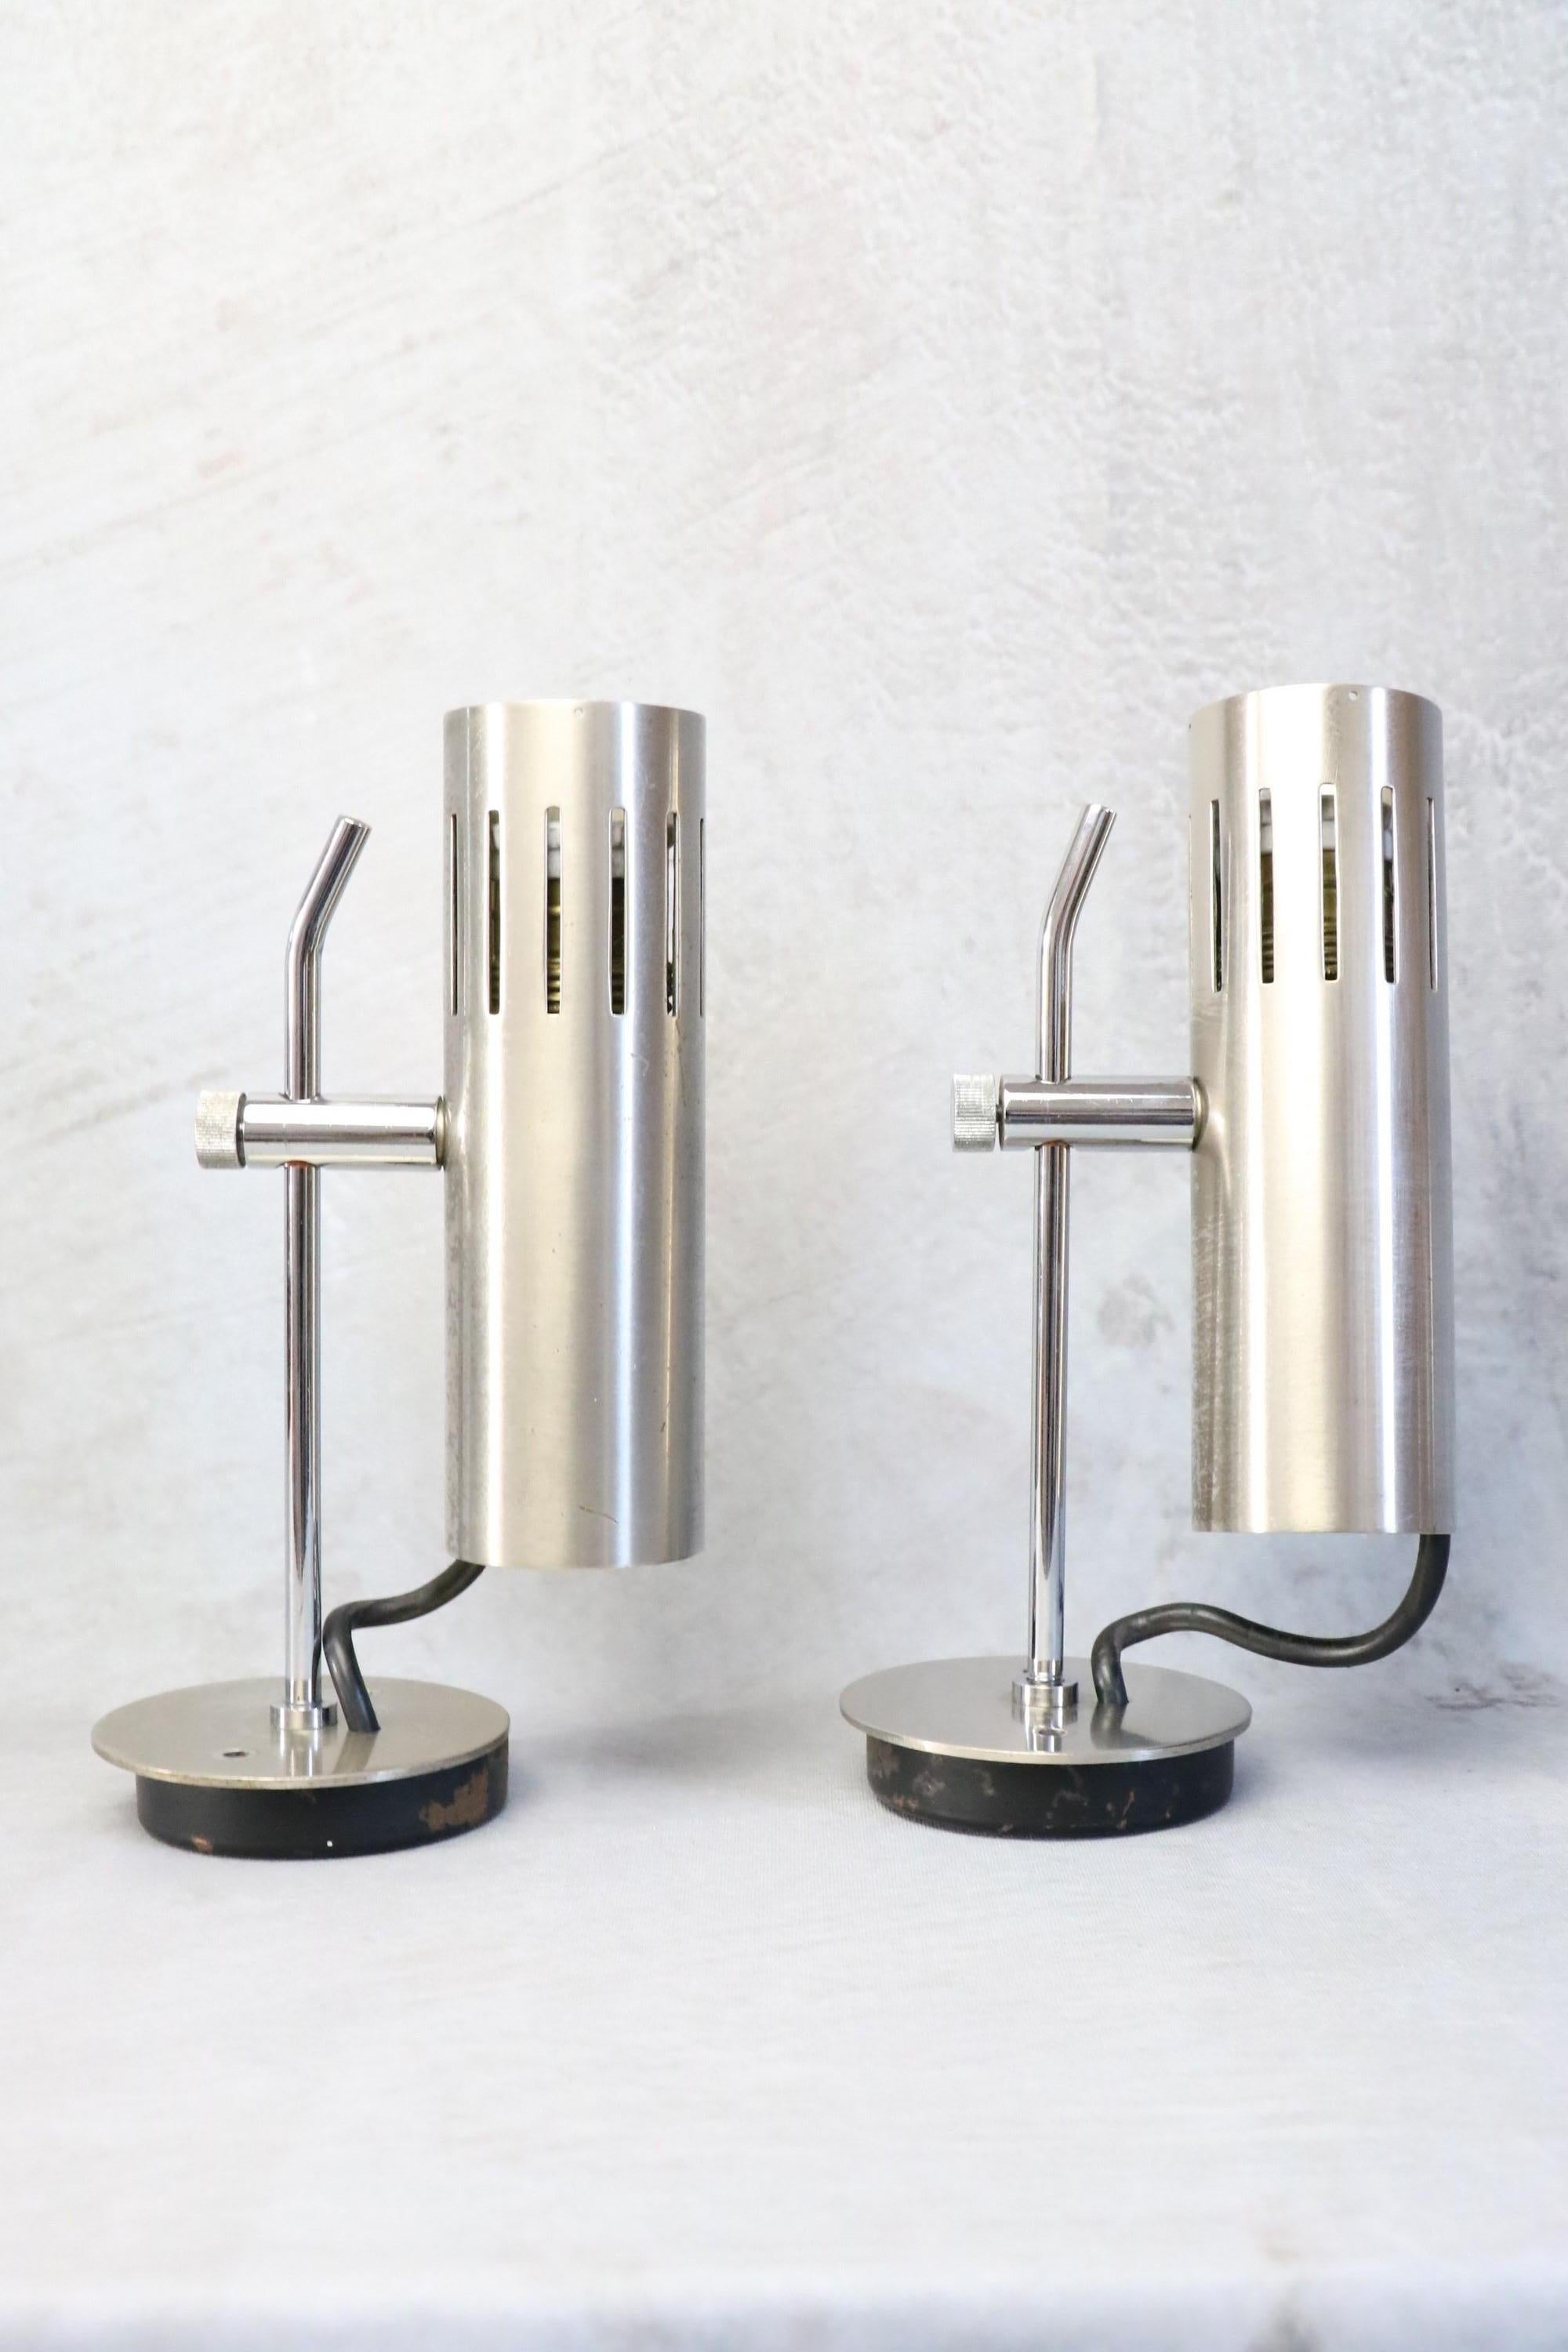 Alain Richard - pair of mid-century A5 sconces circa 1960 - era Biny, Guariche.

Pair of sconces A5, iconic model of the french designer Alain Richard for Pierre Disderot. Fully adjustable wall lamps, the reflectors of these sconces are swiveling